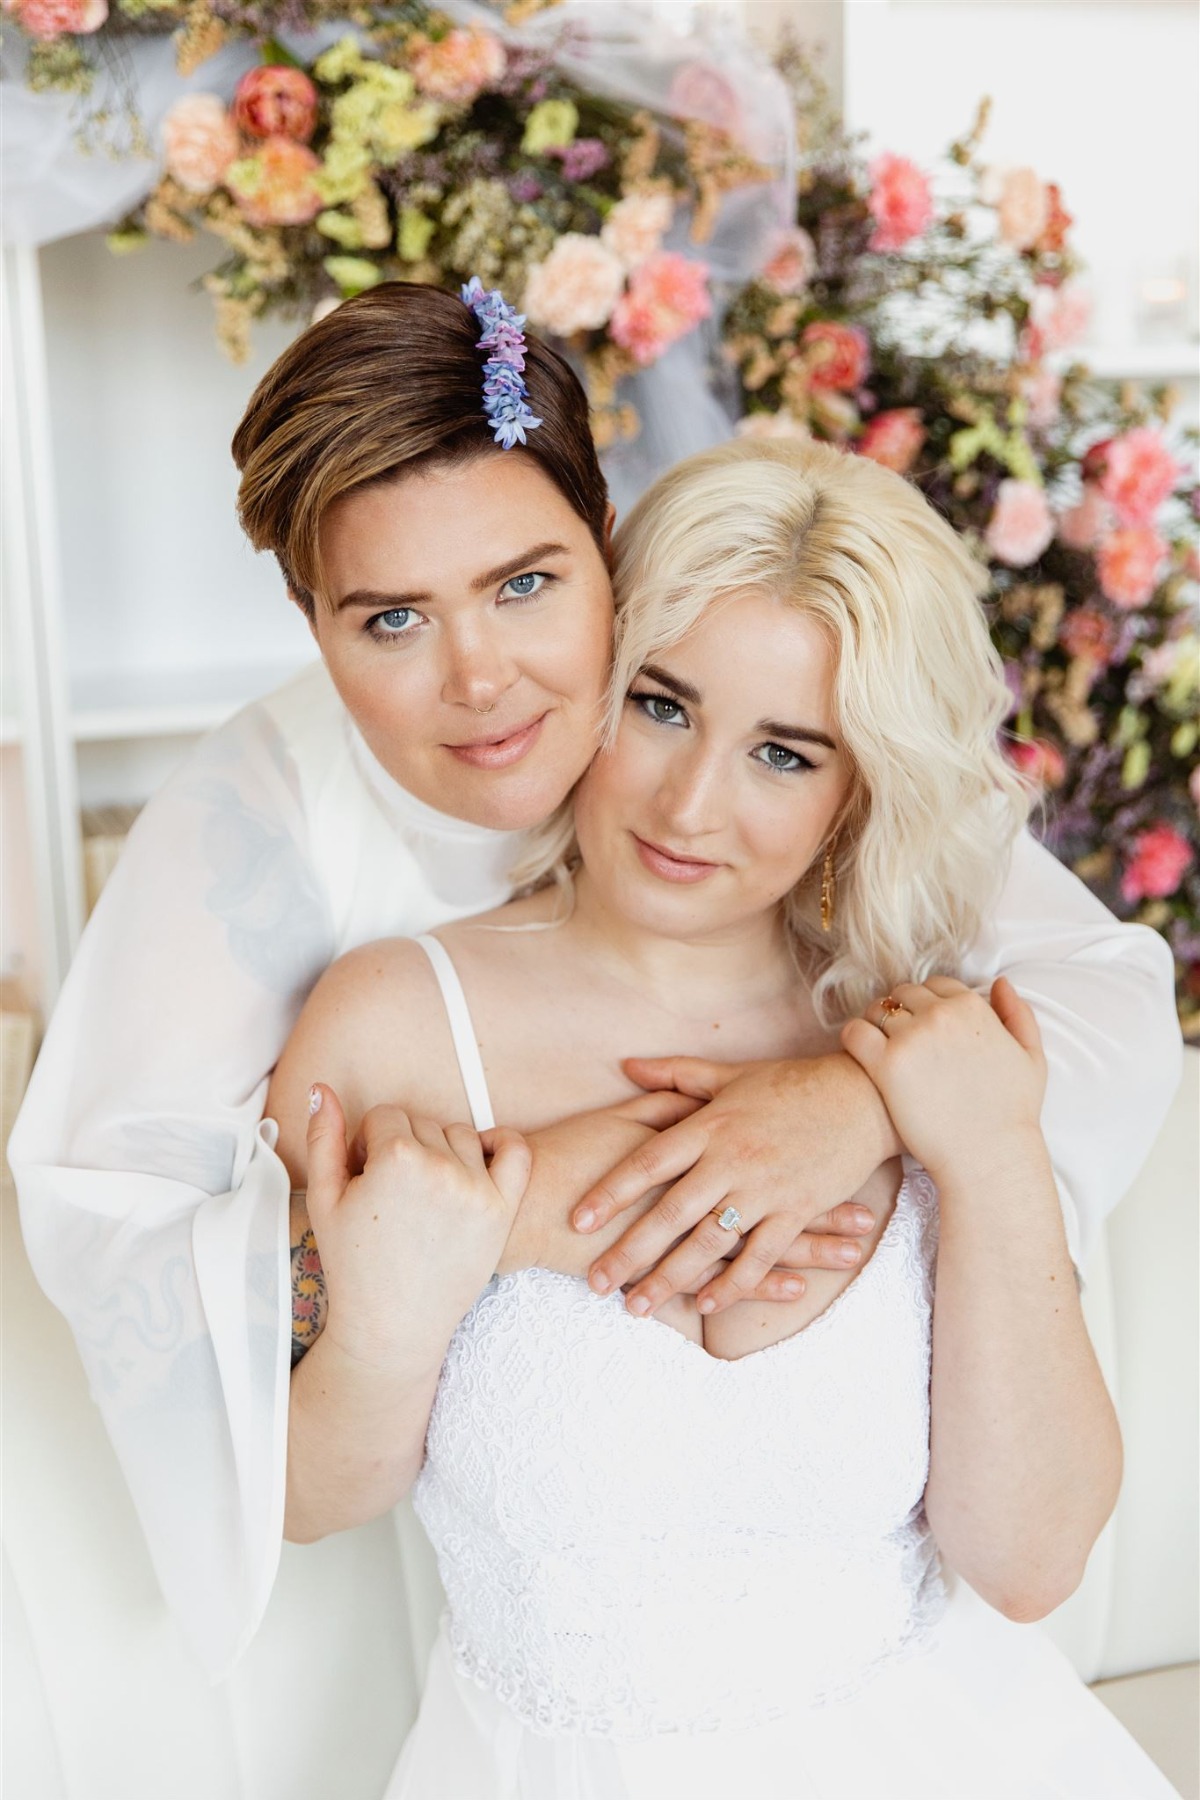 Queer wedding fashion and makeup 